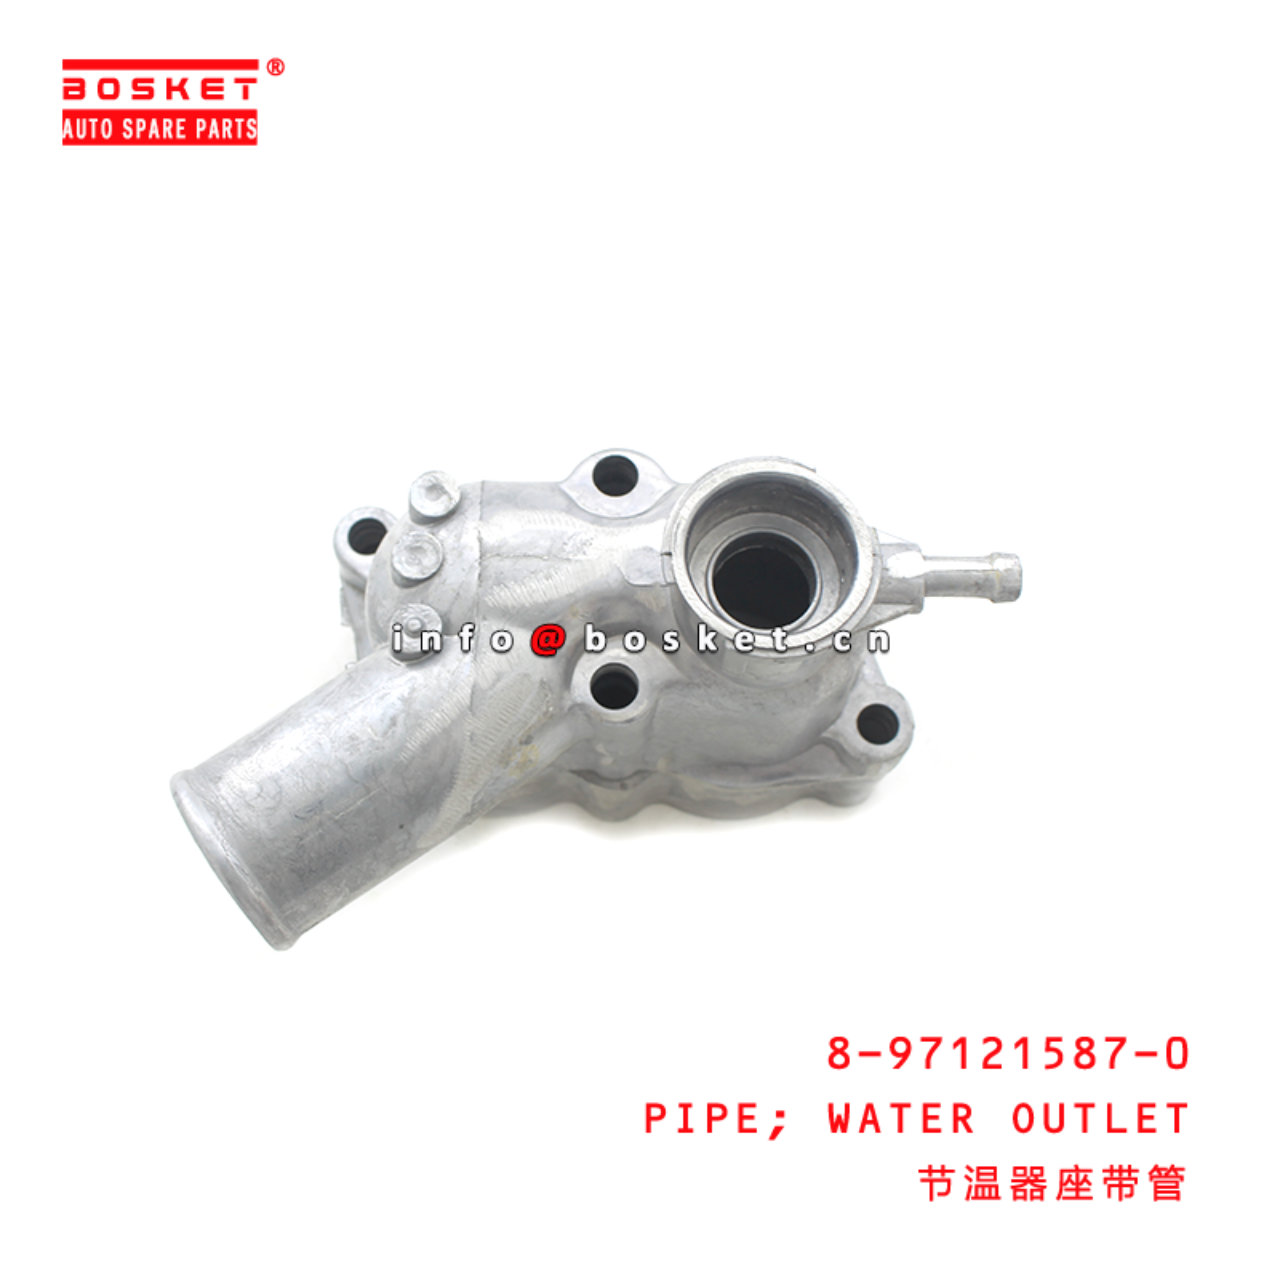 8-97121587-0 Water Outlet Pipe Suitable for ISUZU 4HF1 8971215870